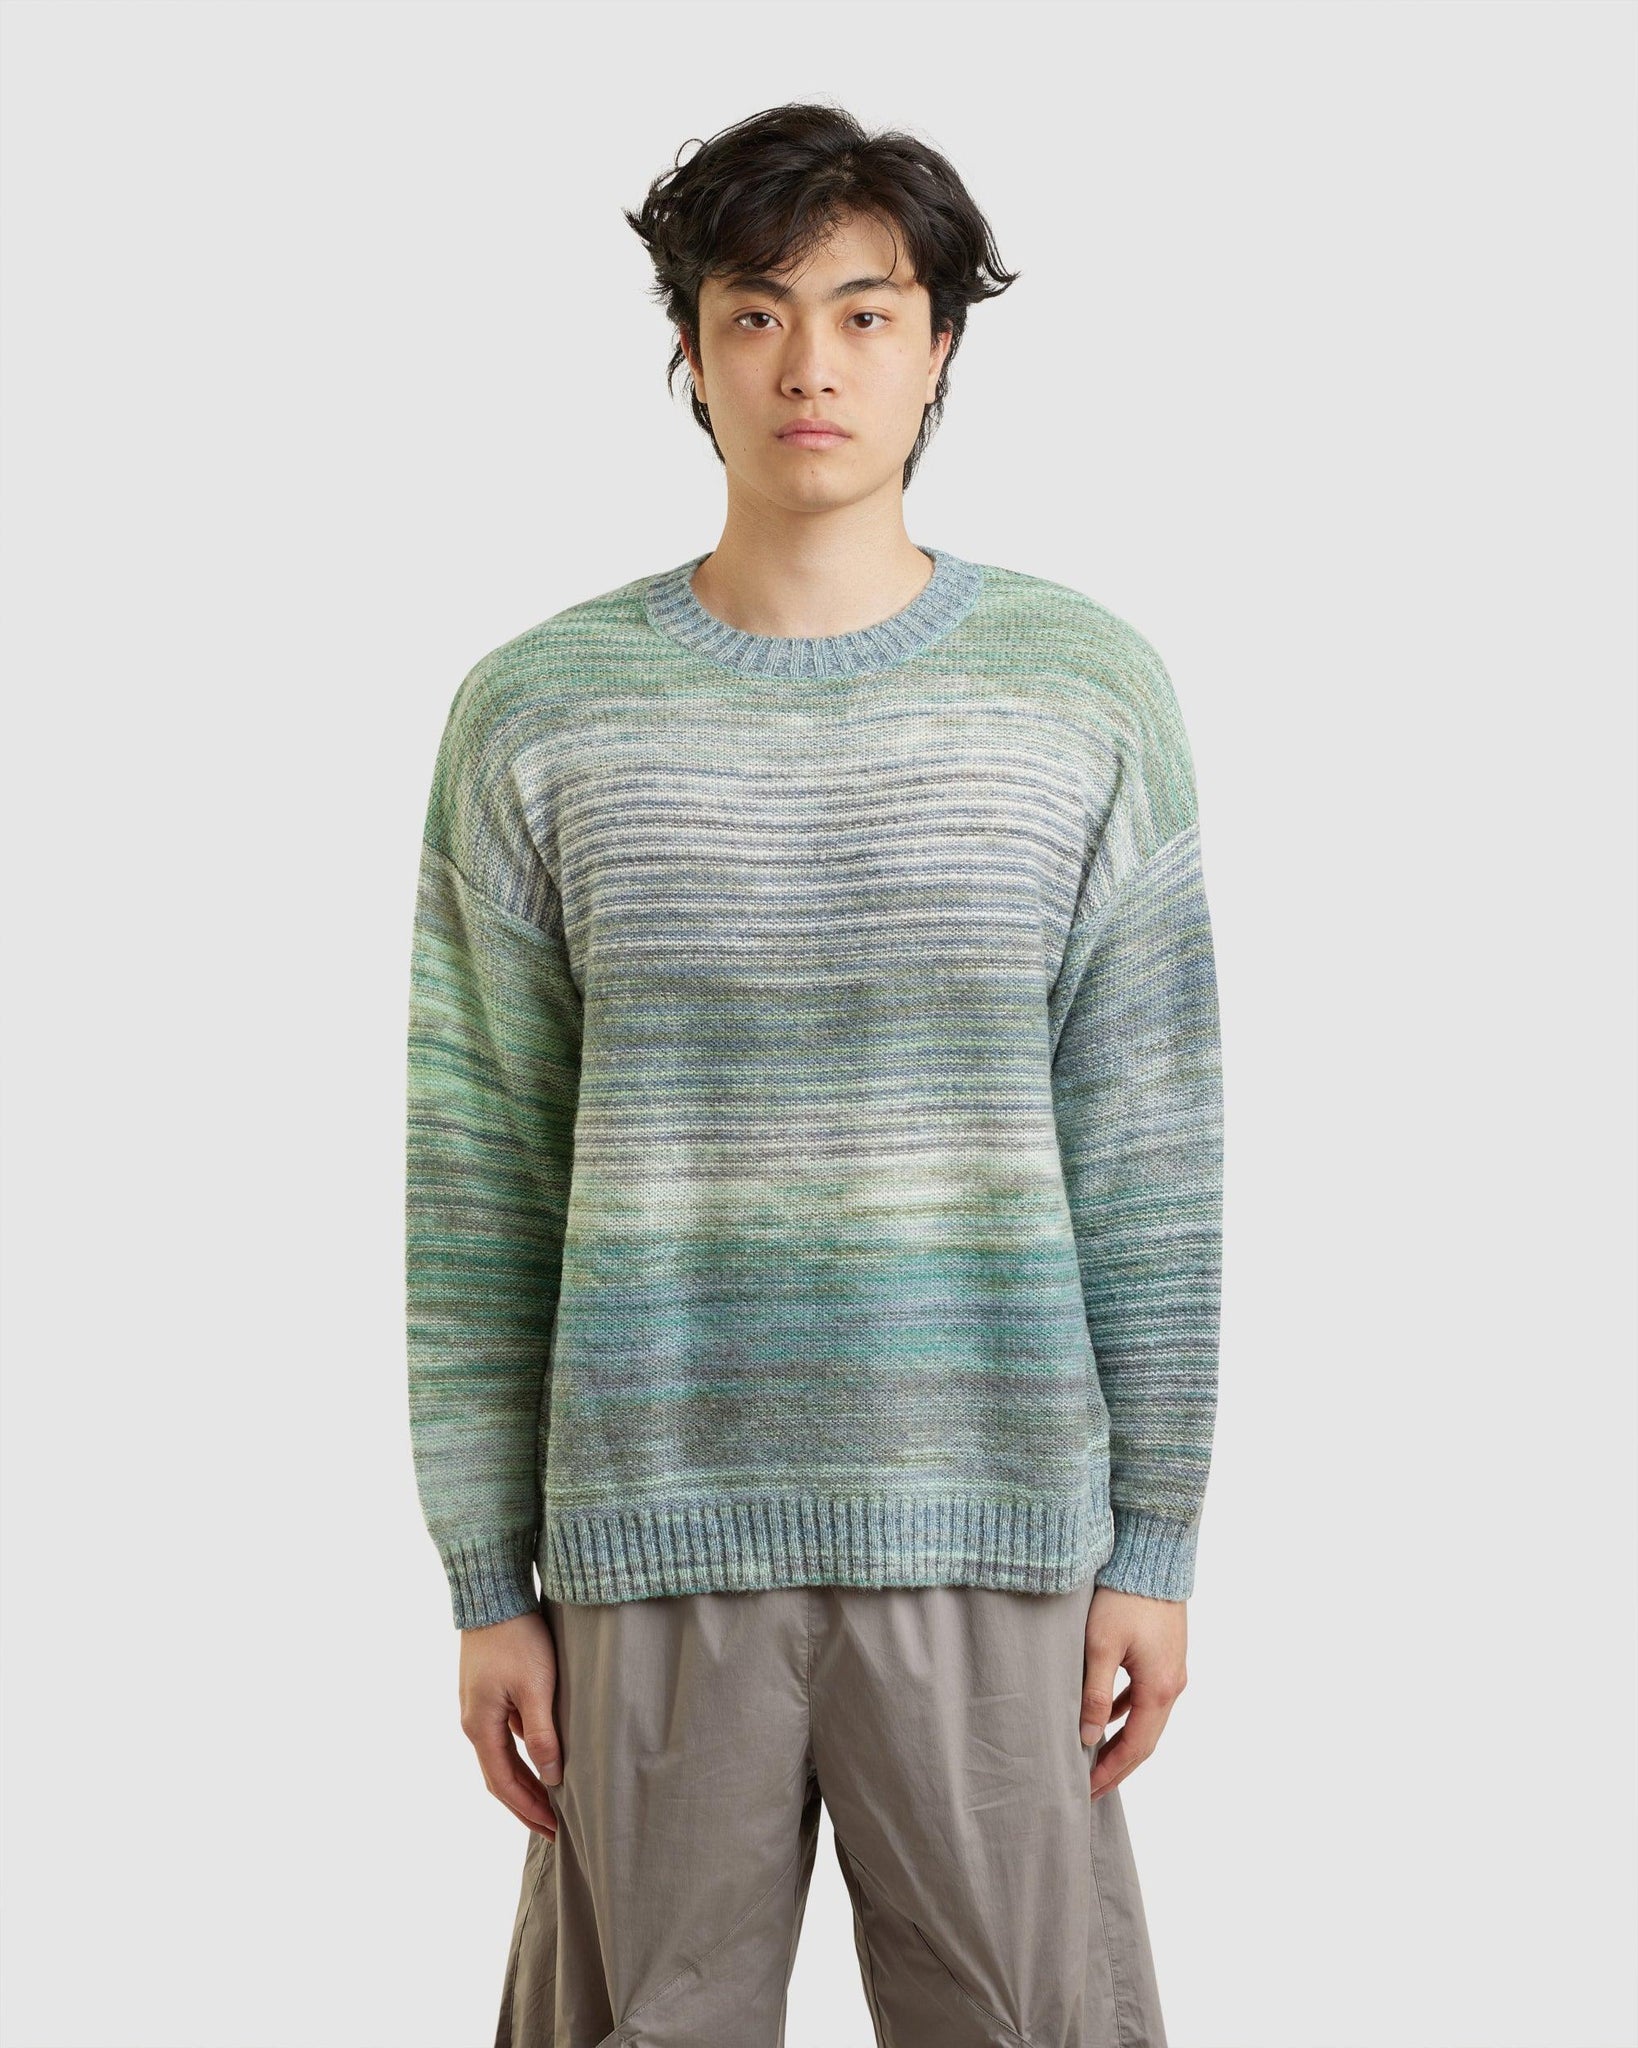 Sandaker Knit Sweater Blue Mix - {{ collection.title }} - Chinatown Country Club 